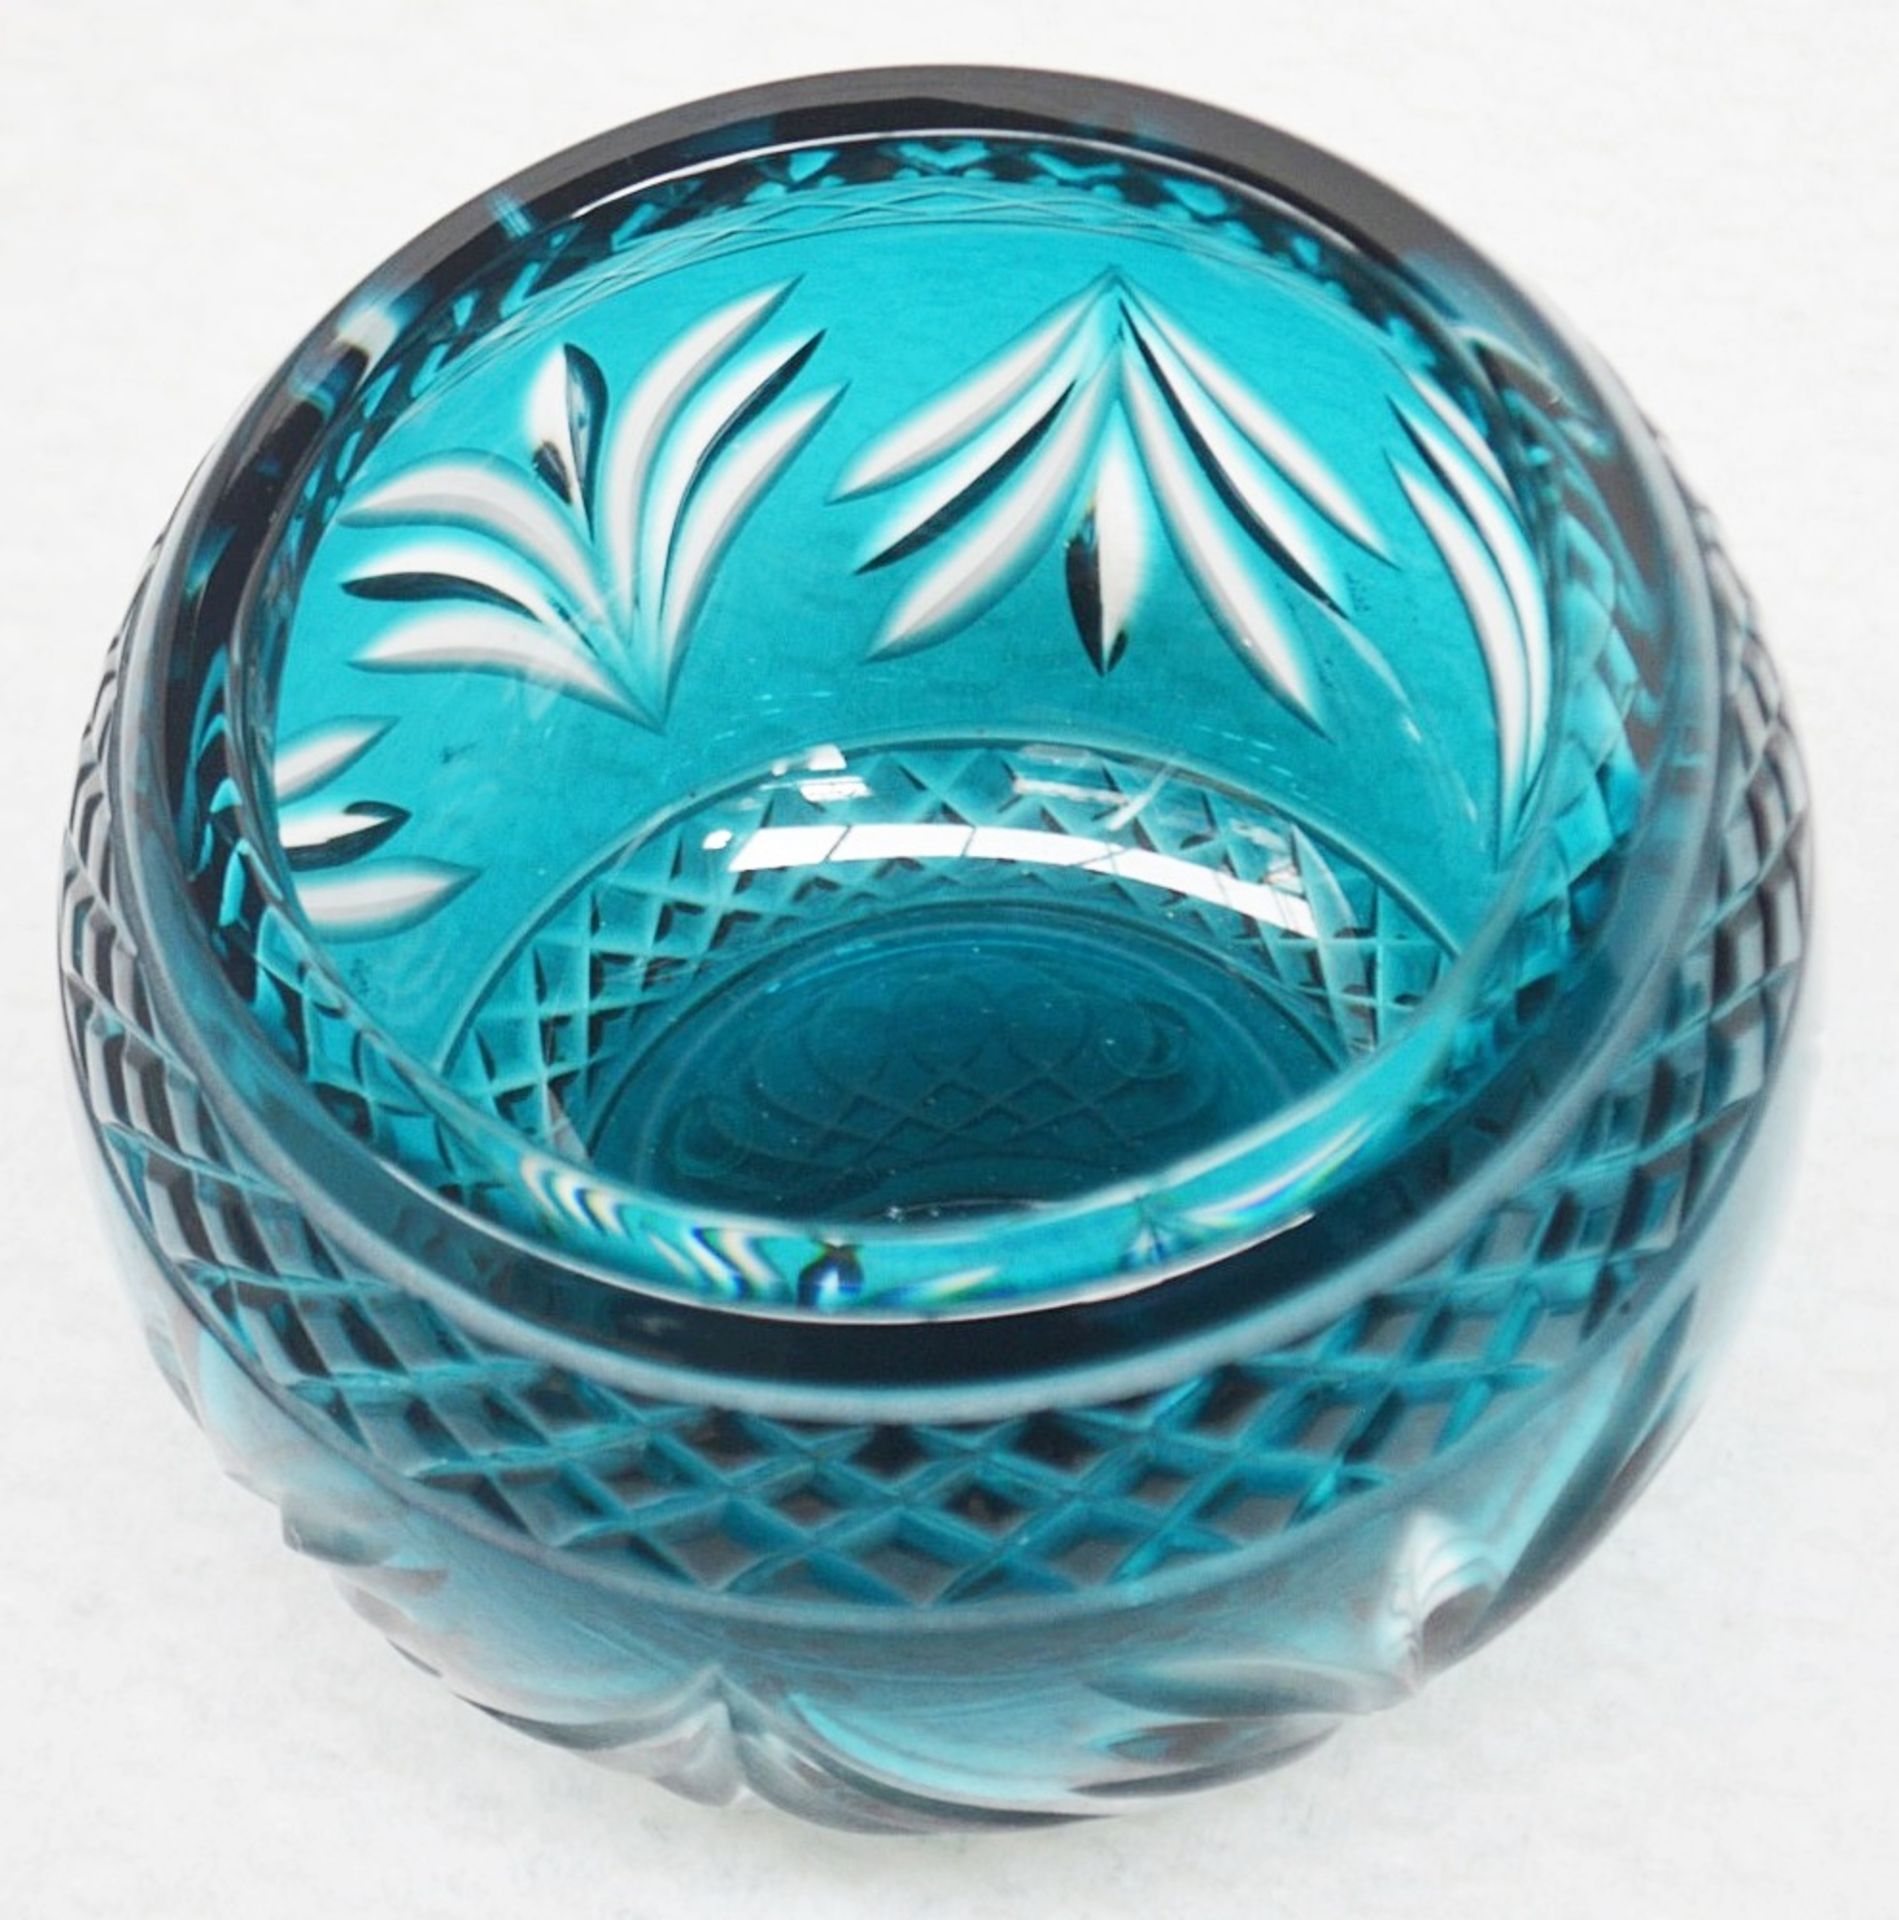 1 x BALDI 'Home Jewels' Italian Hand-crafted Artisan Crystal Coccinella Box In Turquoise - RRP £900 - Image 2 of 5